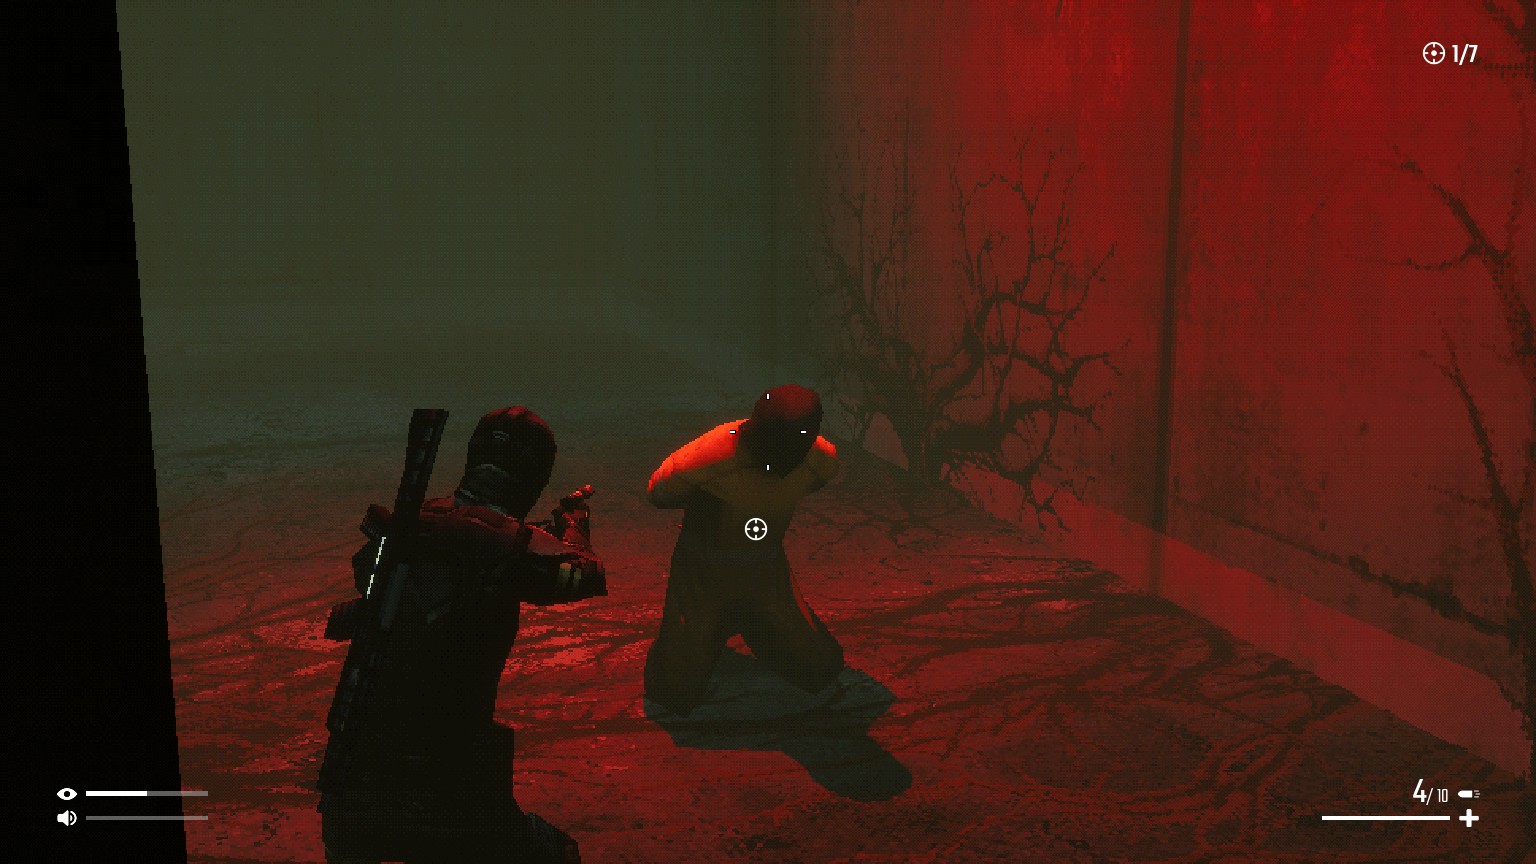 I have located one of my targets found in the level. The target seems to be tied up and their head covered. The room is tinted red and vines are seen growing from the floor up.